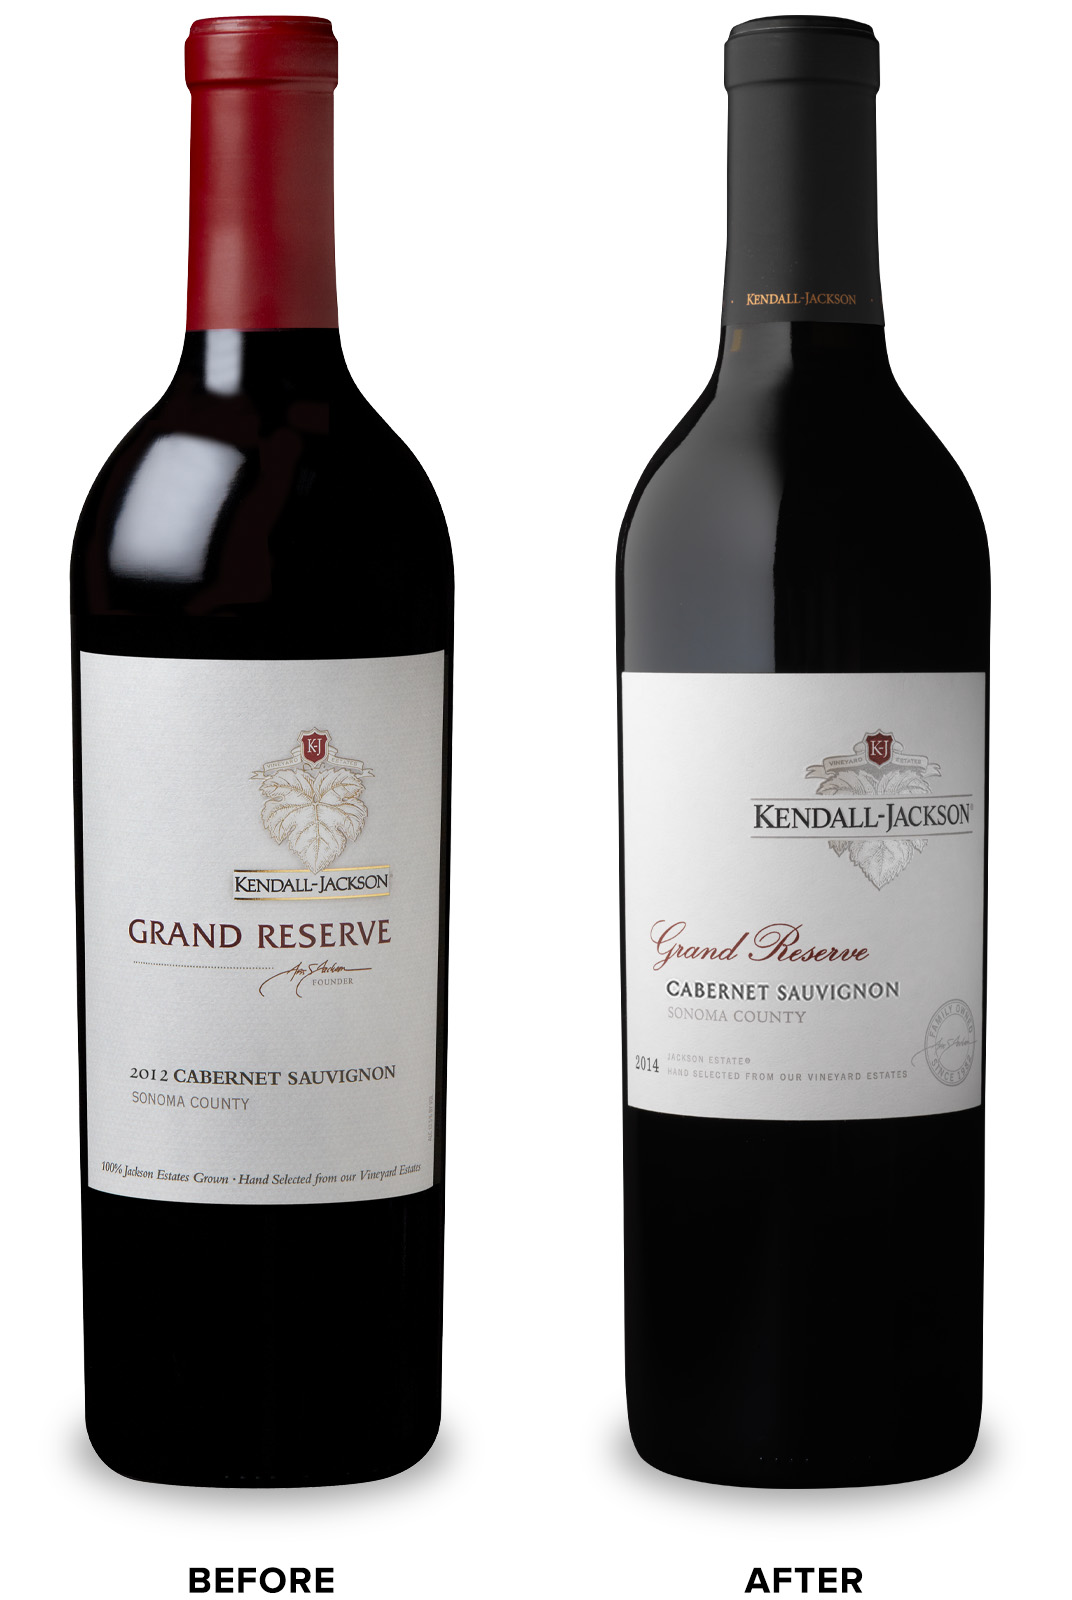 Kendall-Jackson Grand Reserve Red Wine Before Packaging Redesign on Left & After on Right